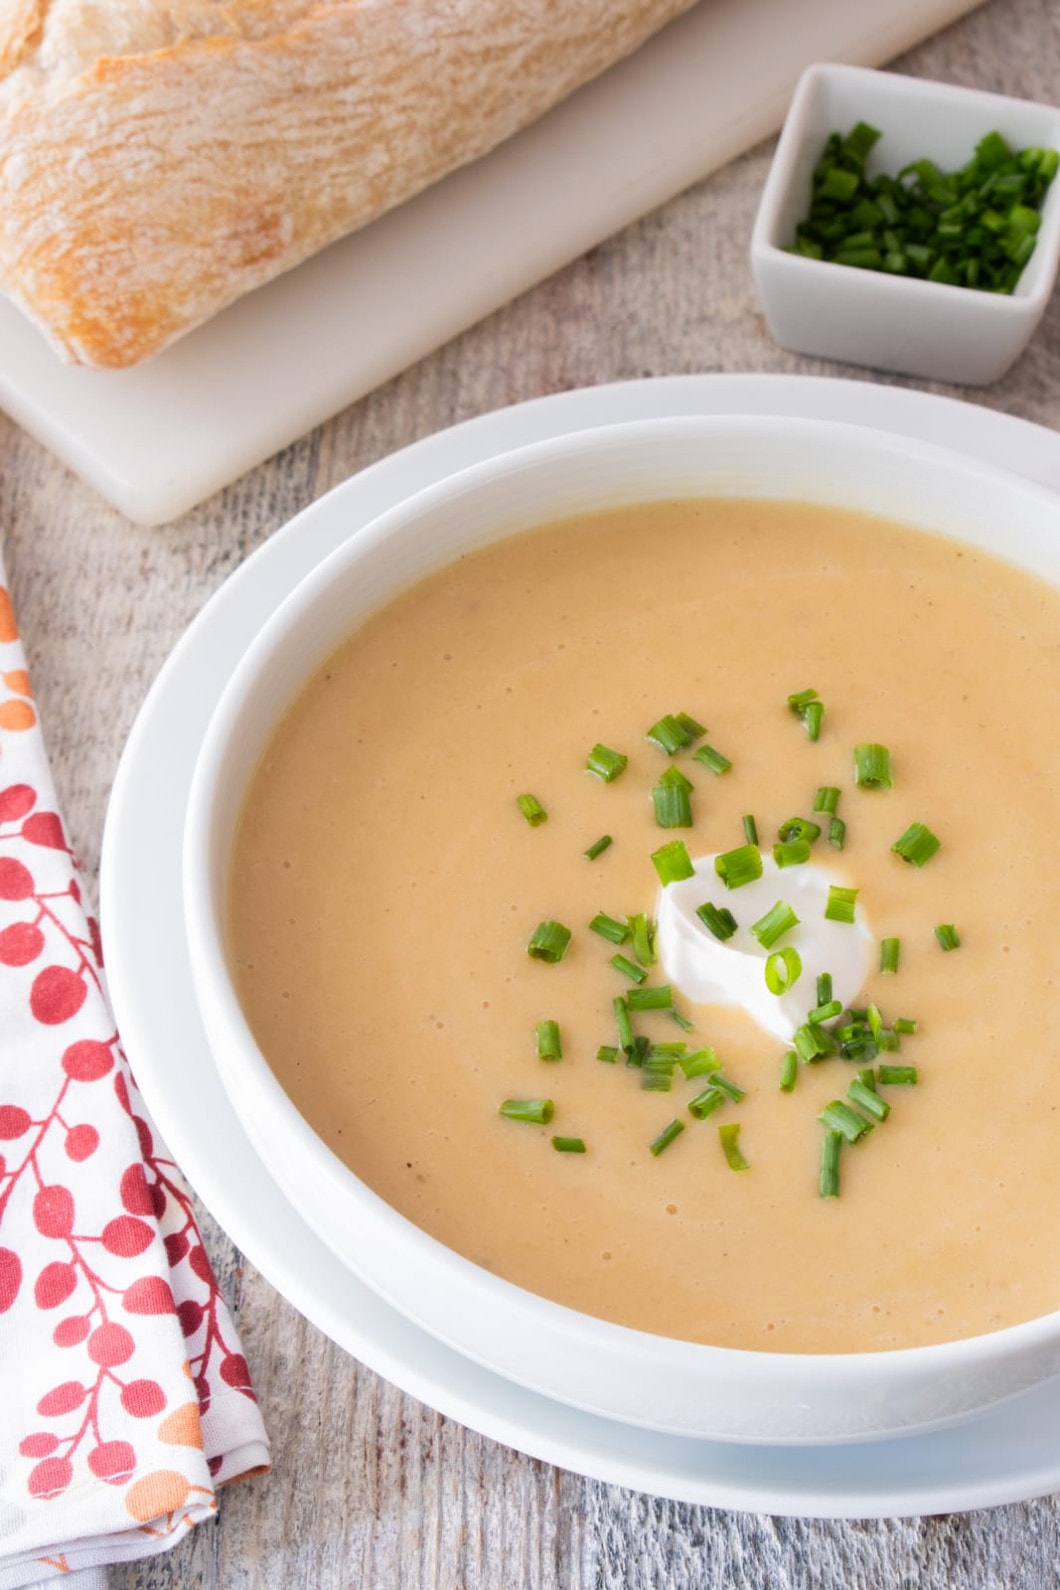 Caramelized Onion and Roasted Garlic Soup